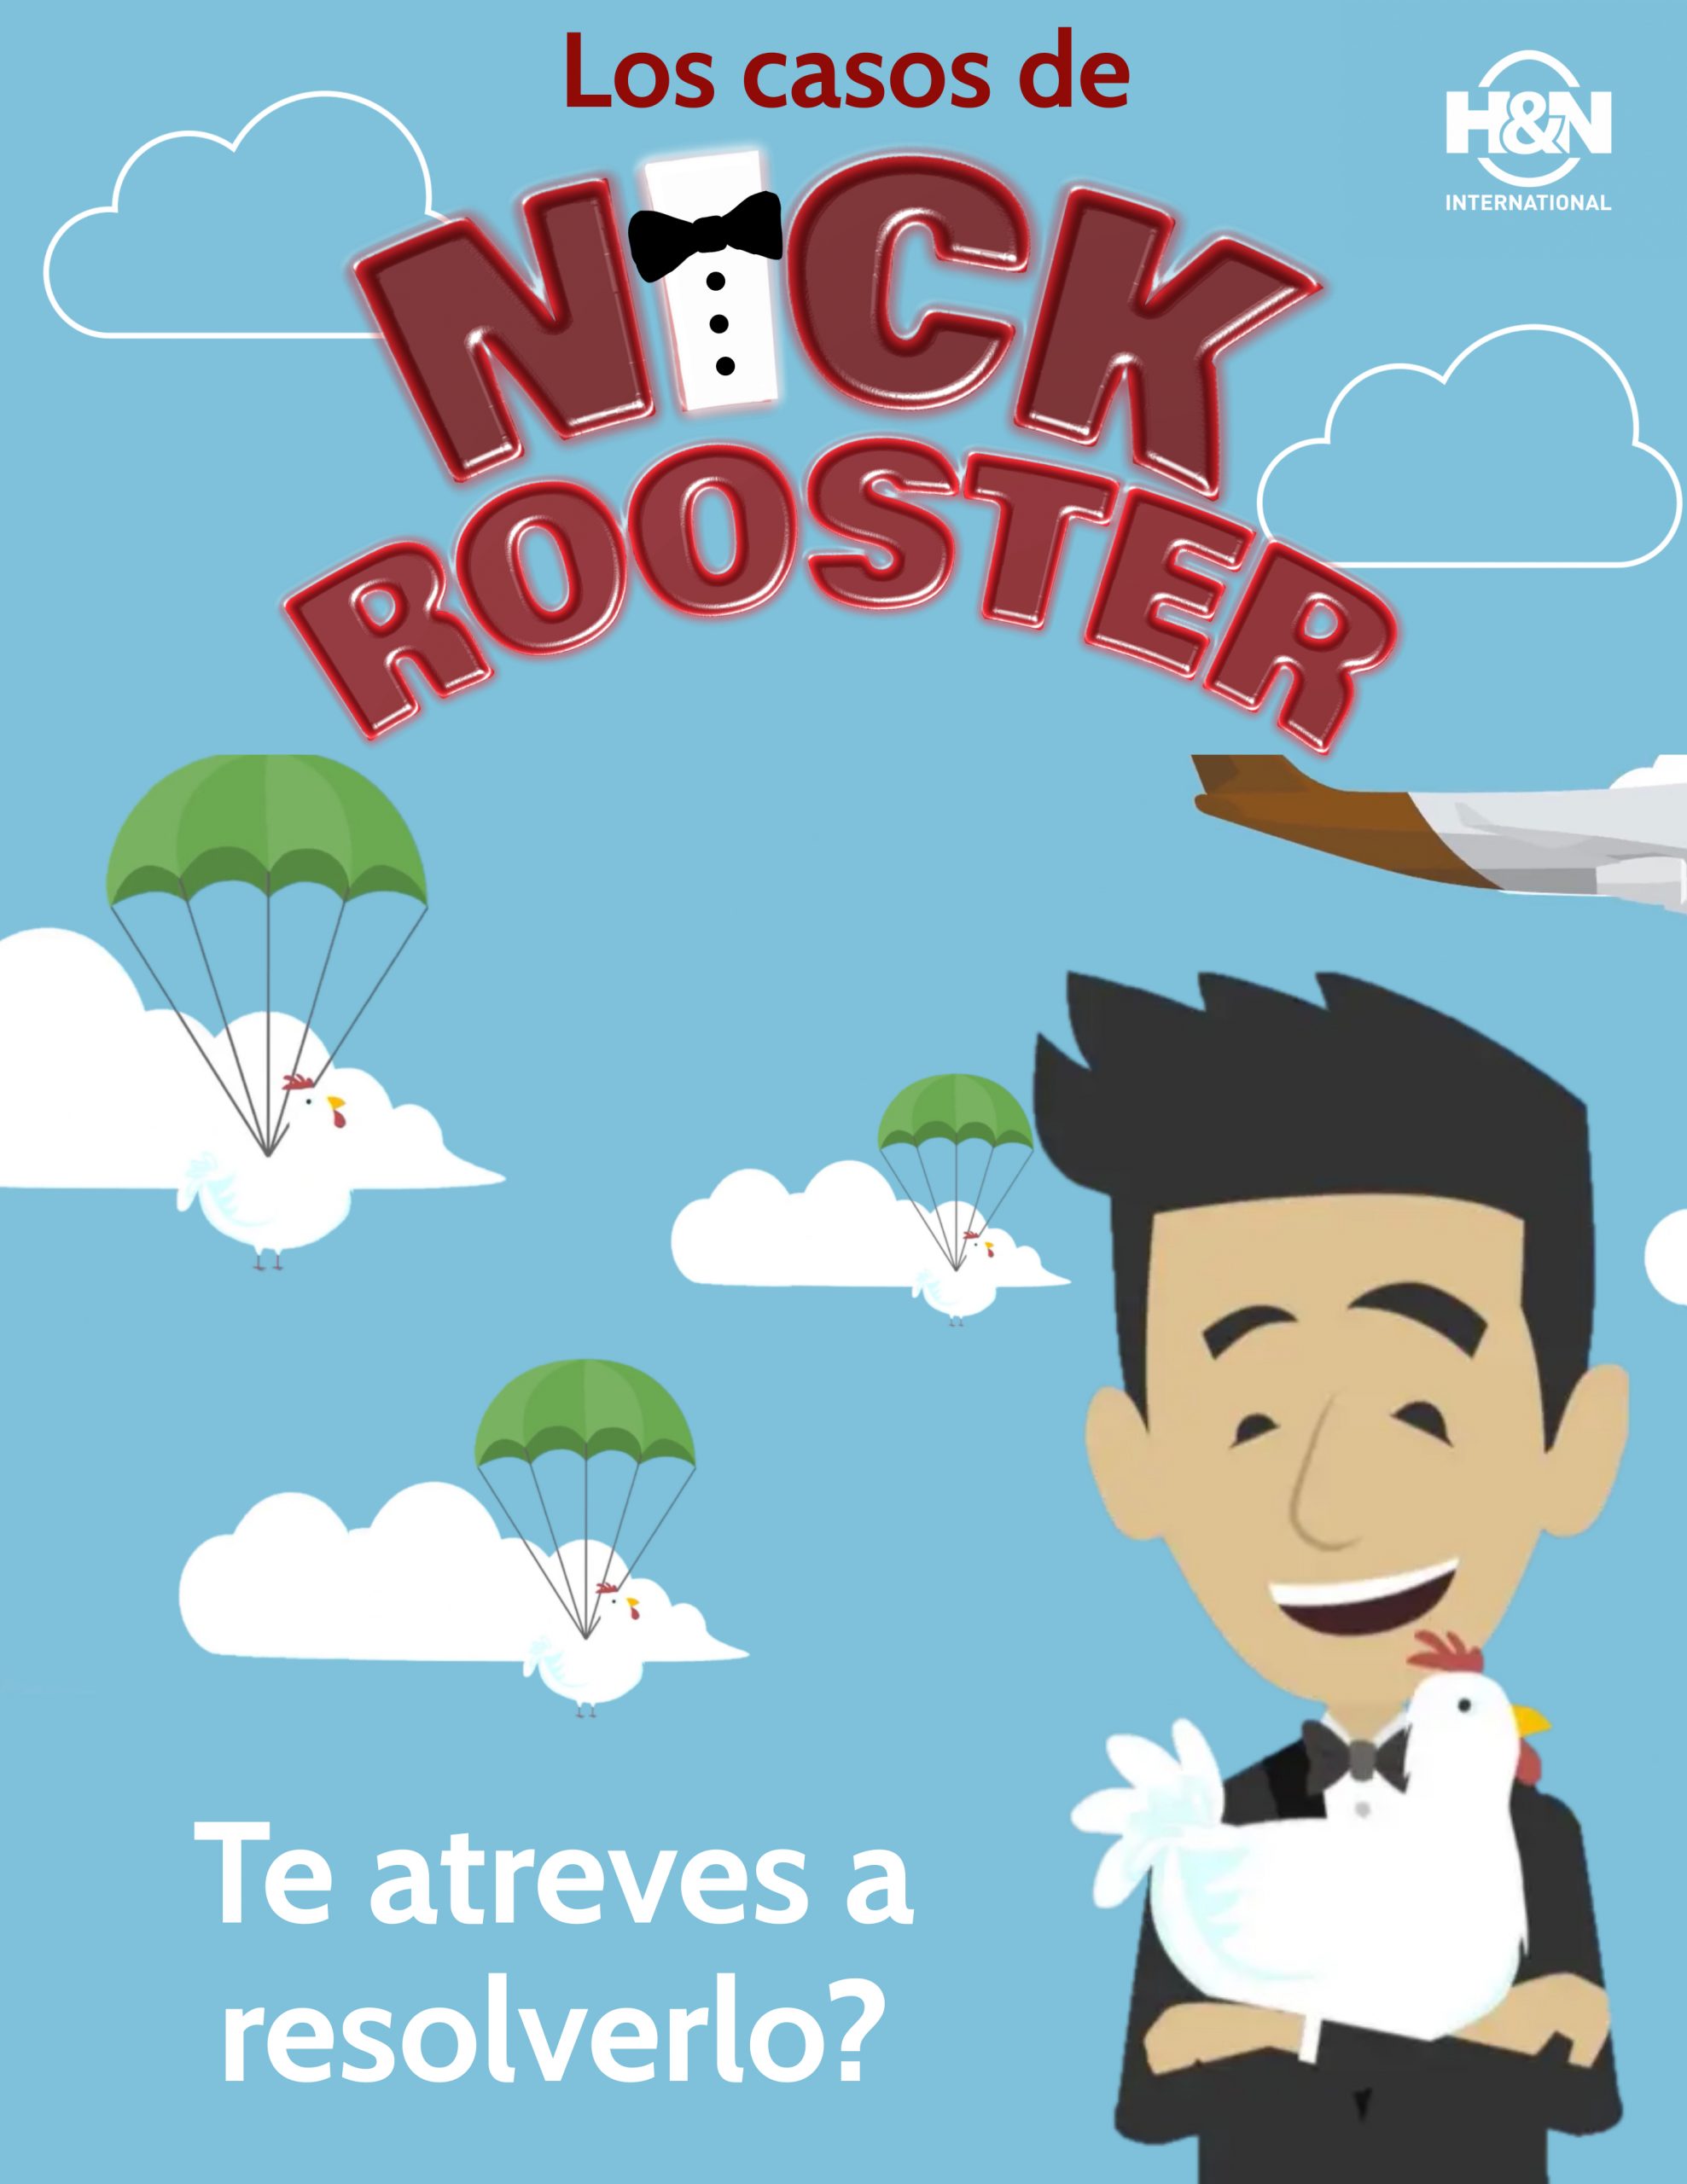 Nick Rooster caso num. 2